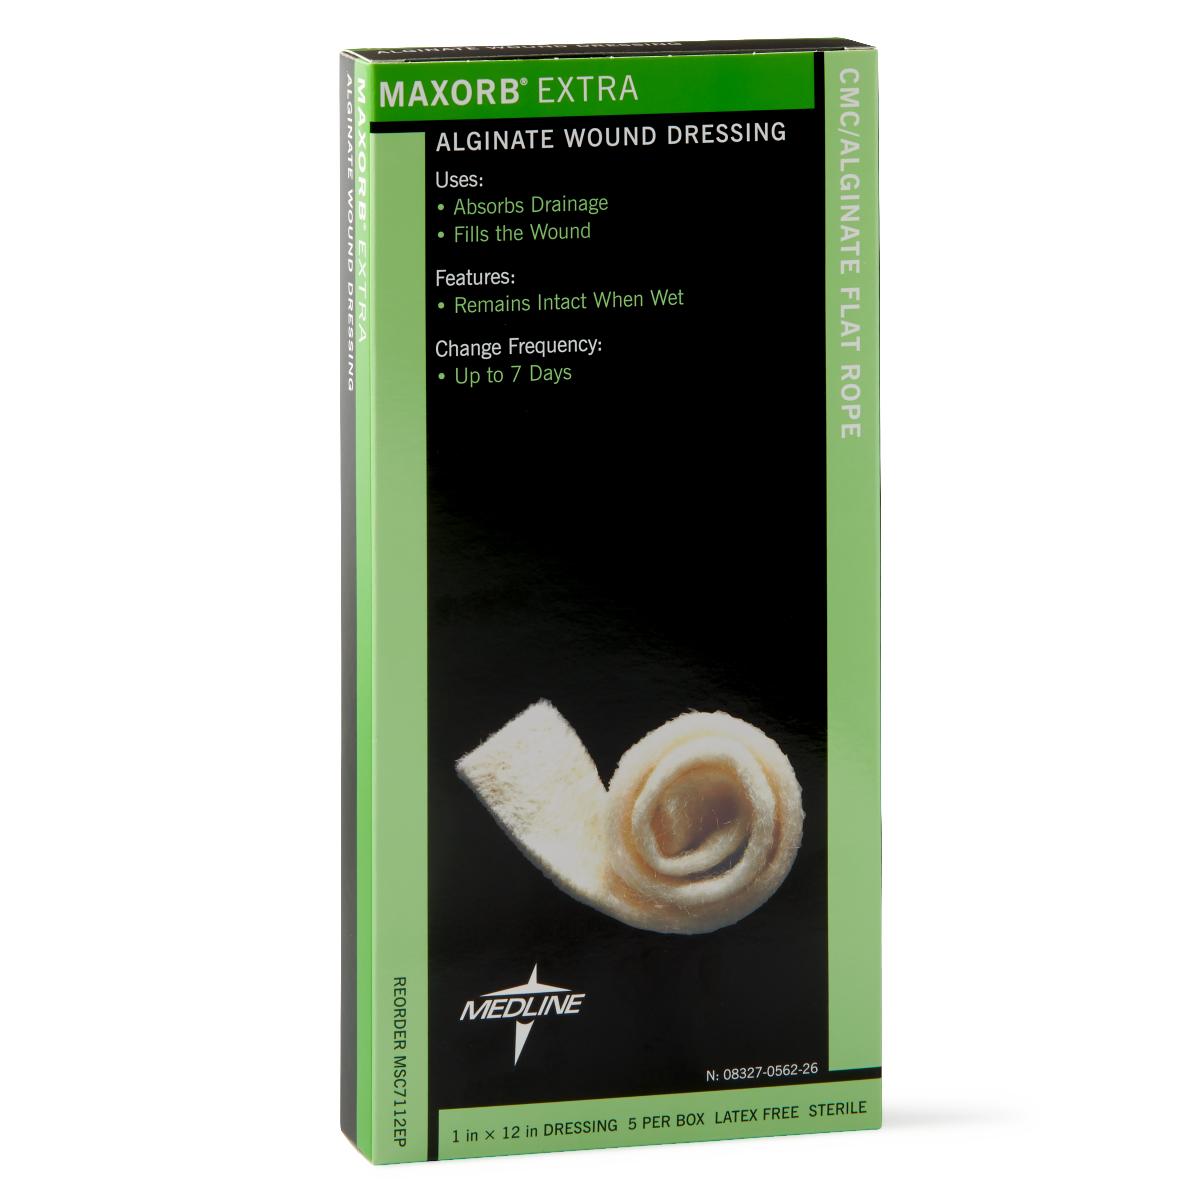 20 Each-Case / Max: 7 Day: Check Drainage / Calcium Alginate Wound Care - MEDLINE - Wasatch Medical Supply